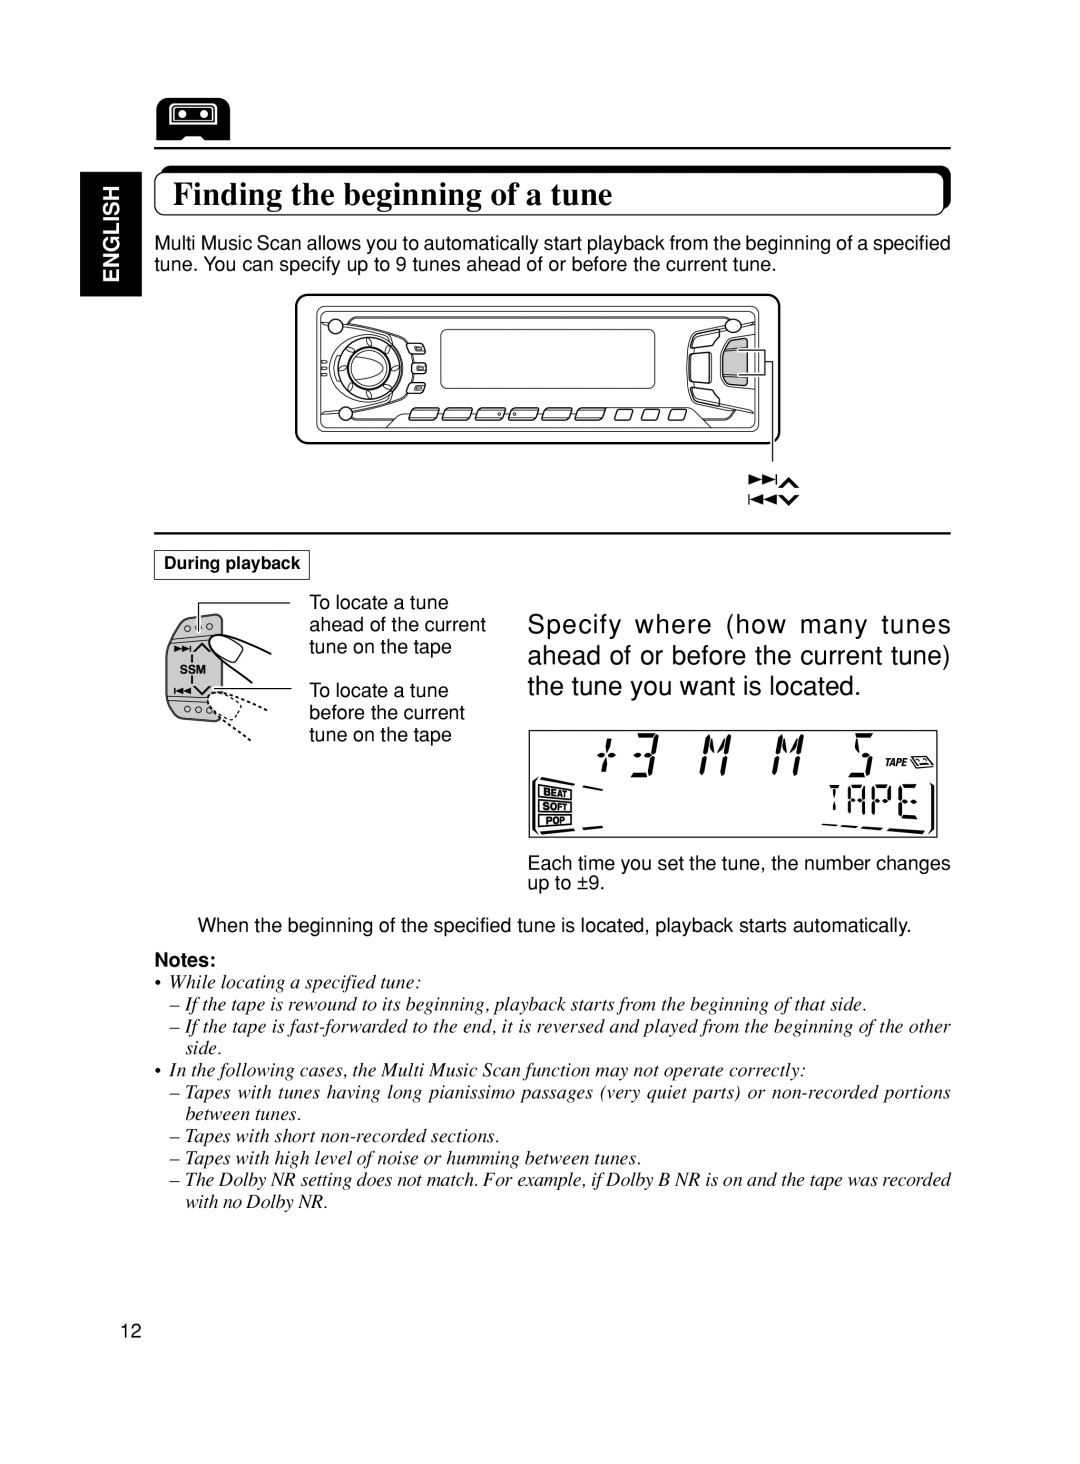 JVC KS-FX90 manual Finding the beginning of a tune, English, Notes 